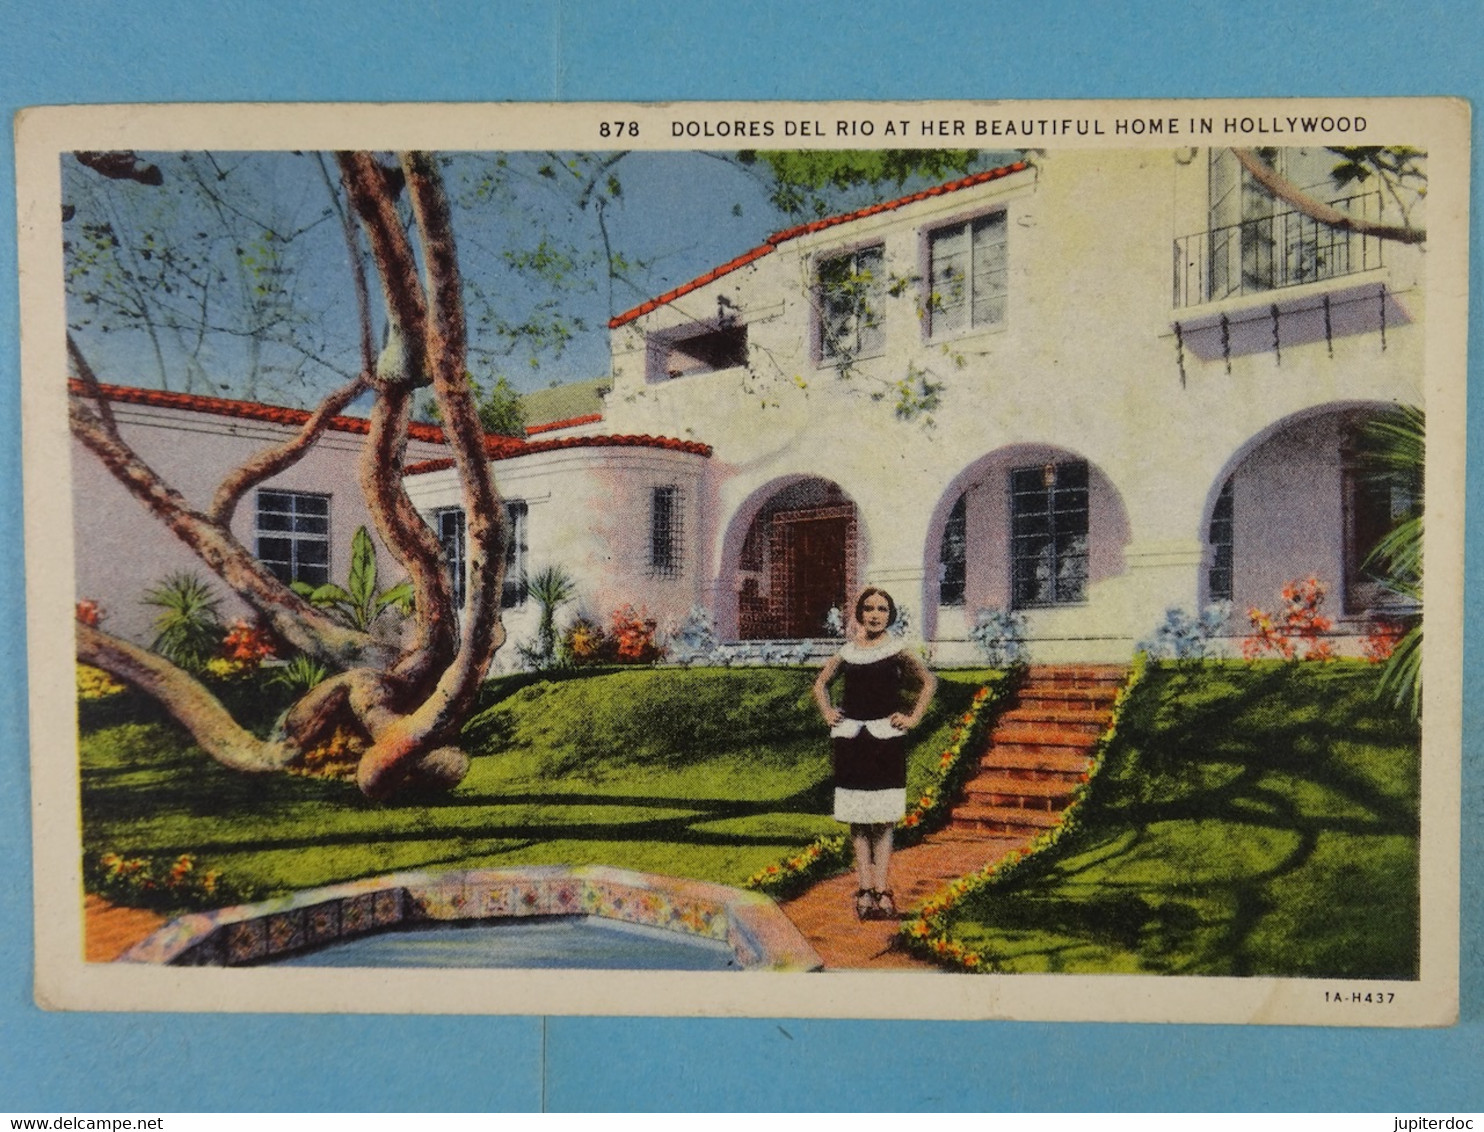 Dolores Del Rio At Her Beautiful Home In Hollywood - Los Angeles